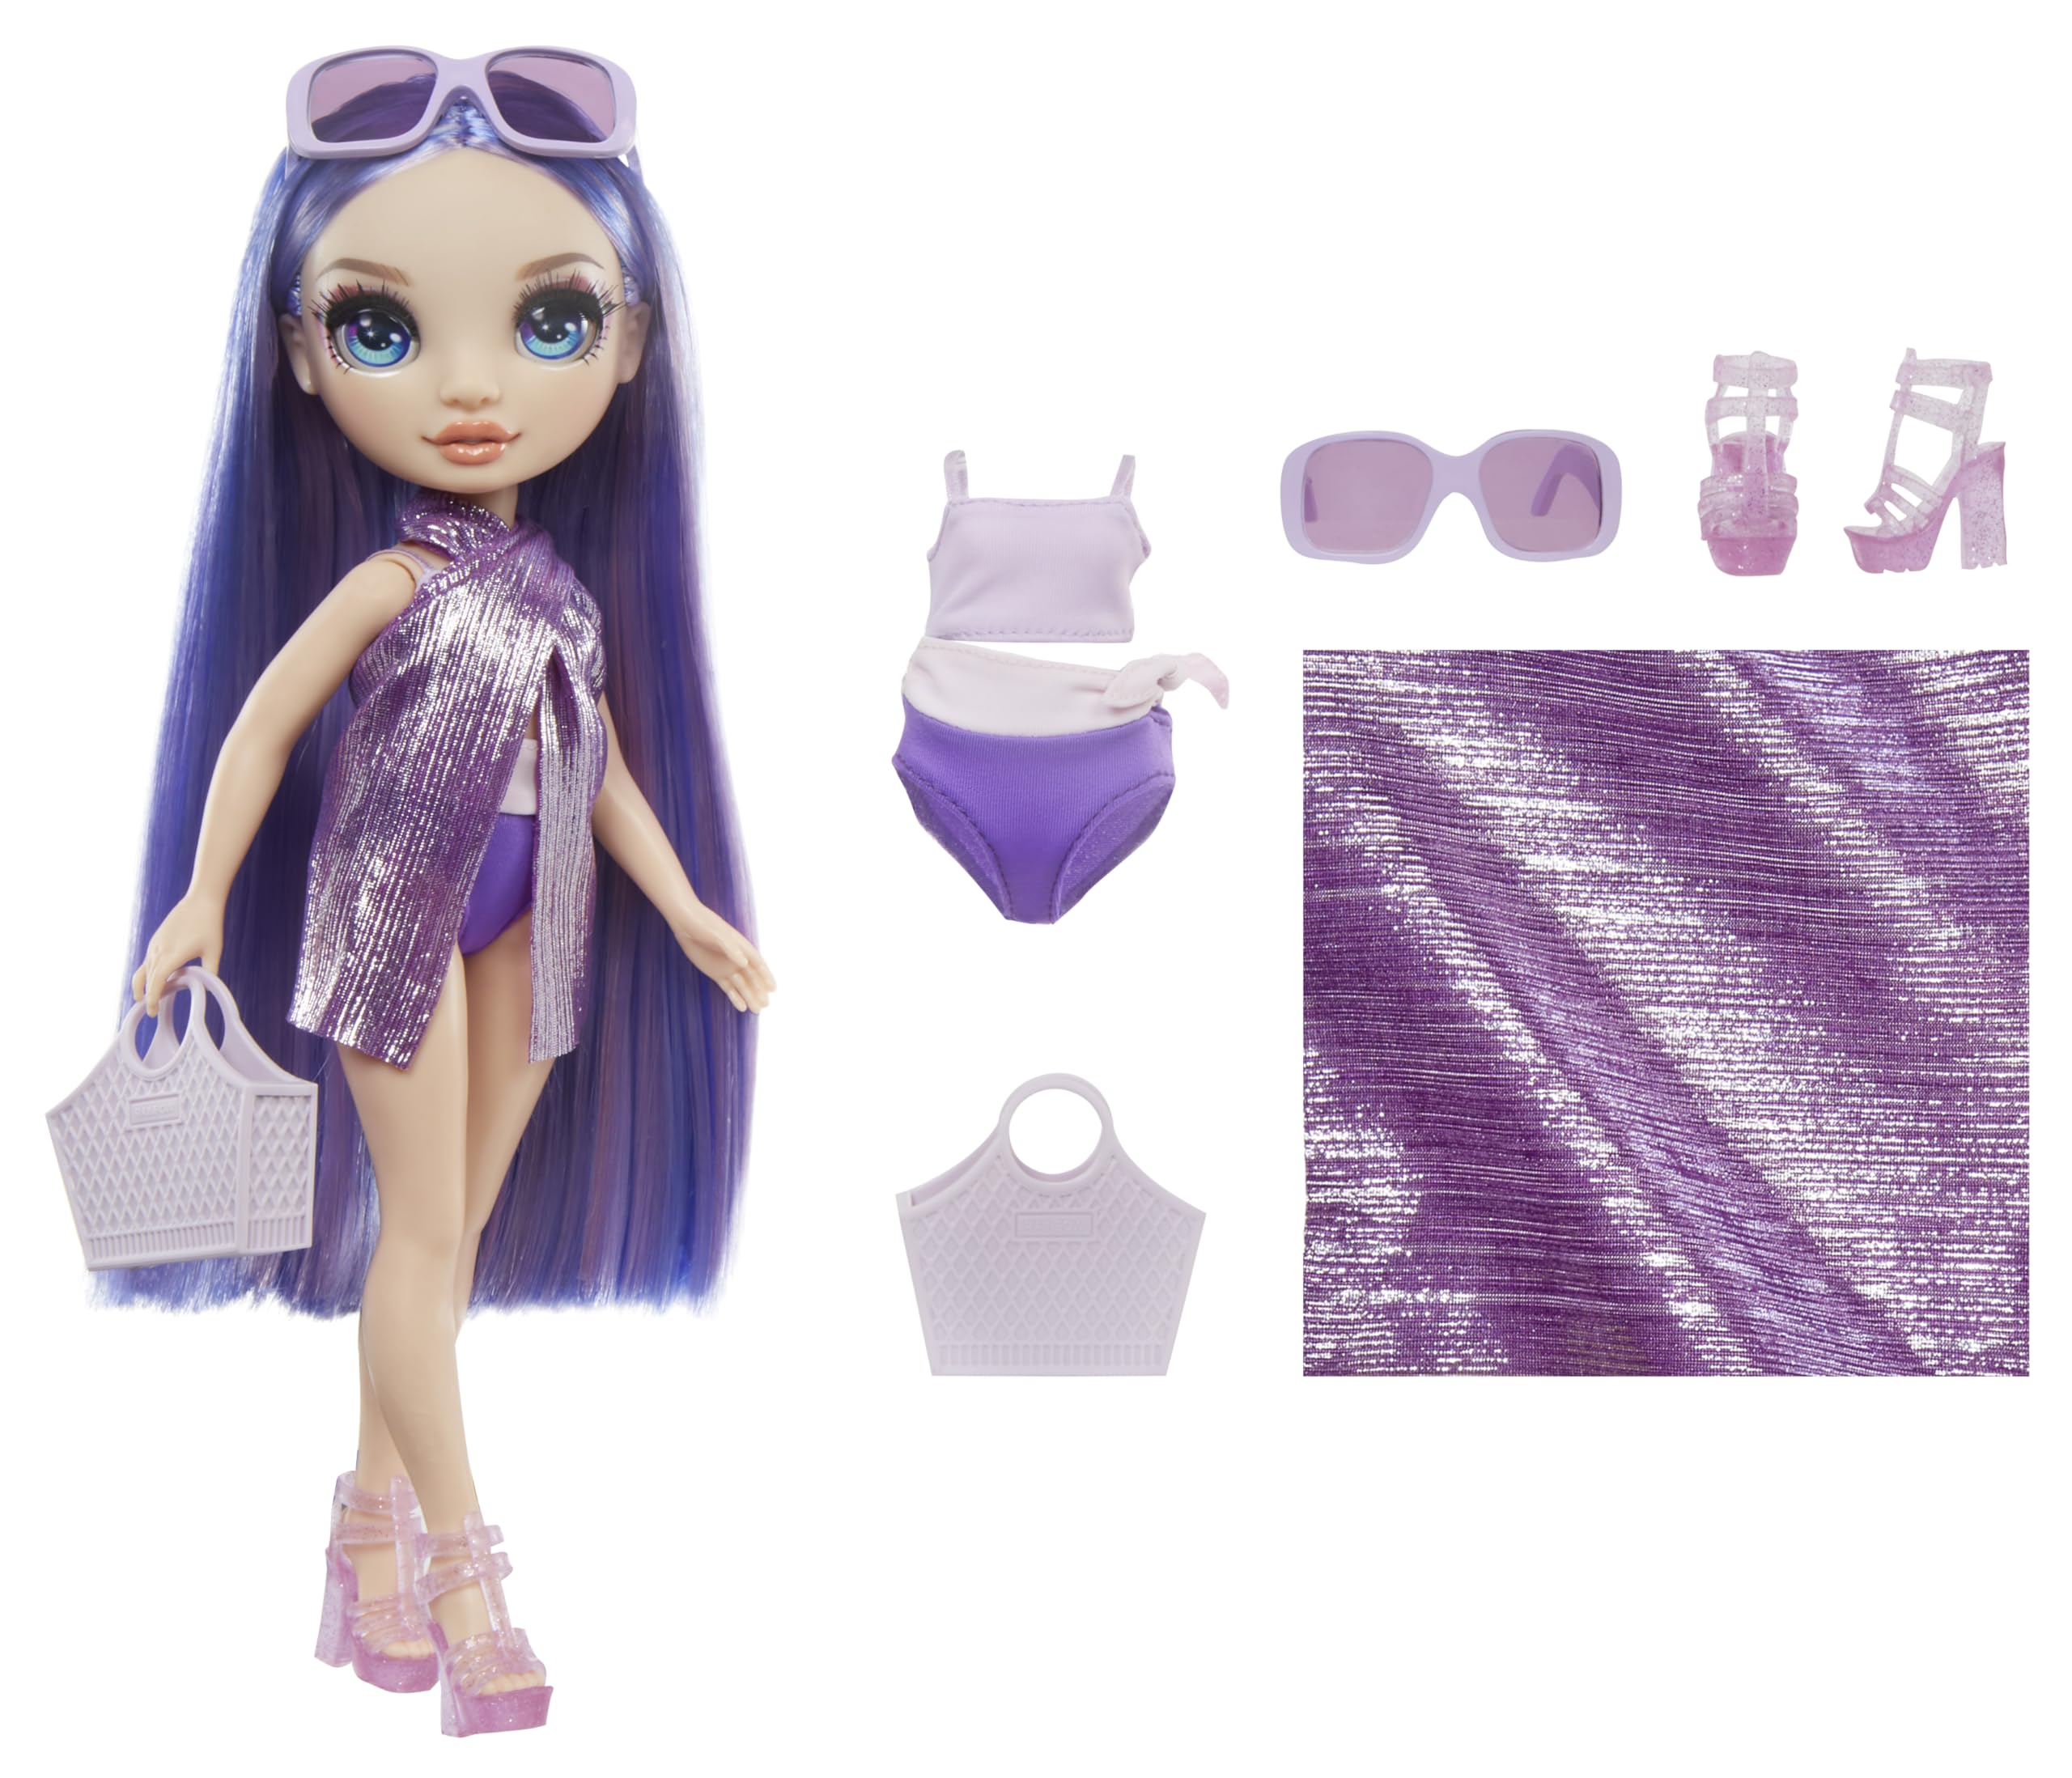 Rainbow High Swim & Style Violet (Purple) 11” Doll with Shimmery Wrap to Style 10+ Ways, Removable Swimsuit, Sandals, Fun Play Accessories. Kids Toy Gift Ages 4-12 Years